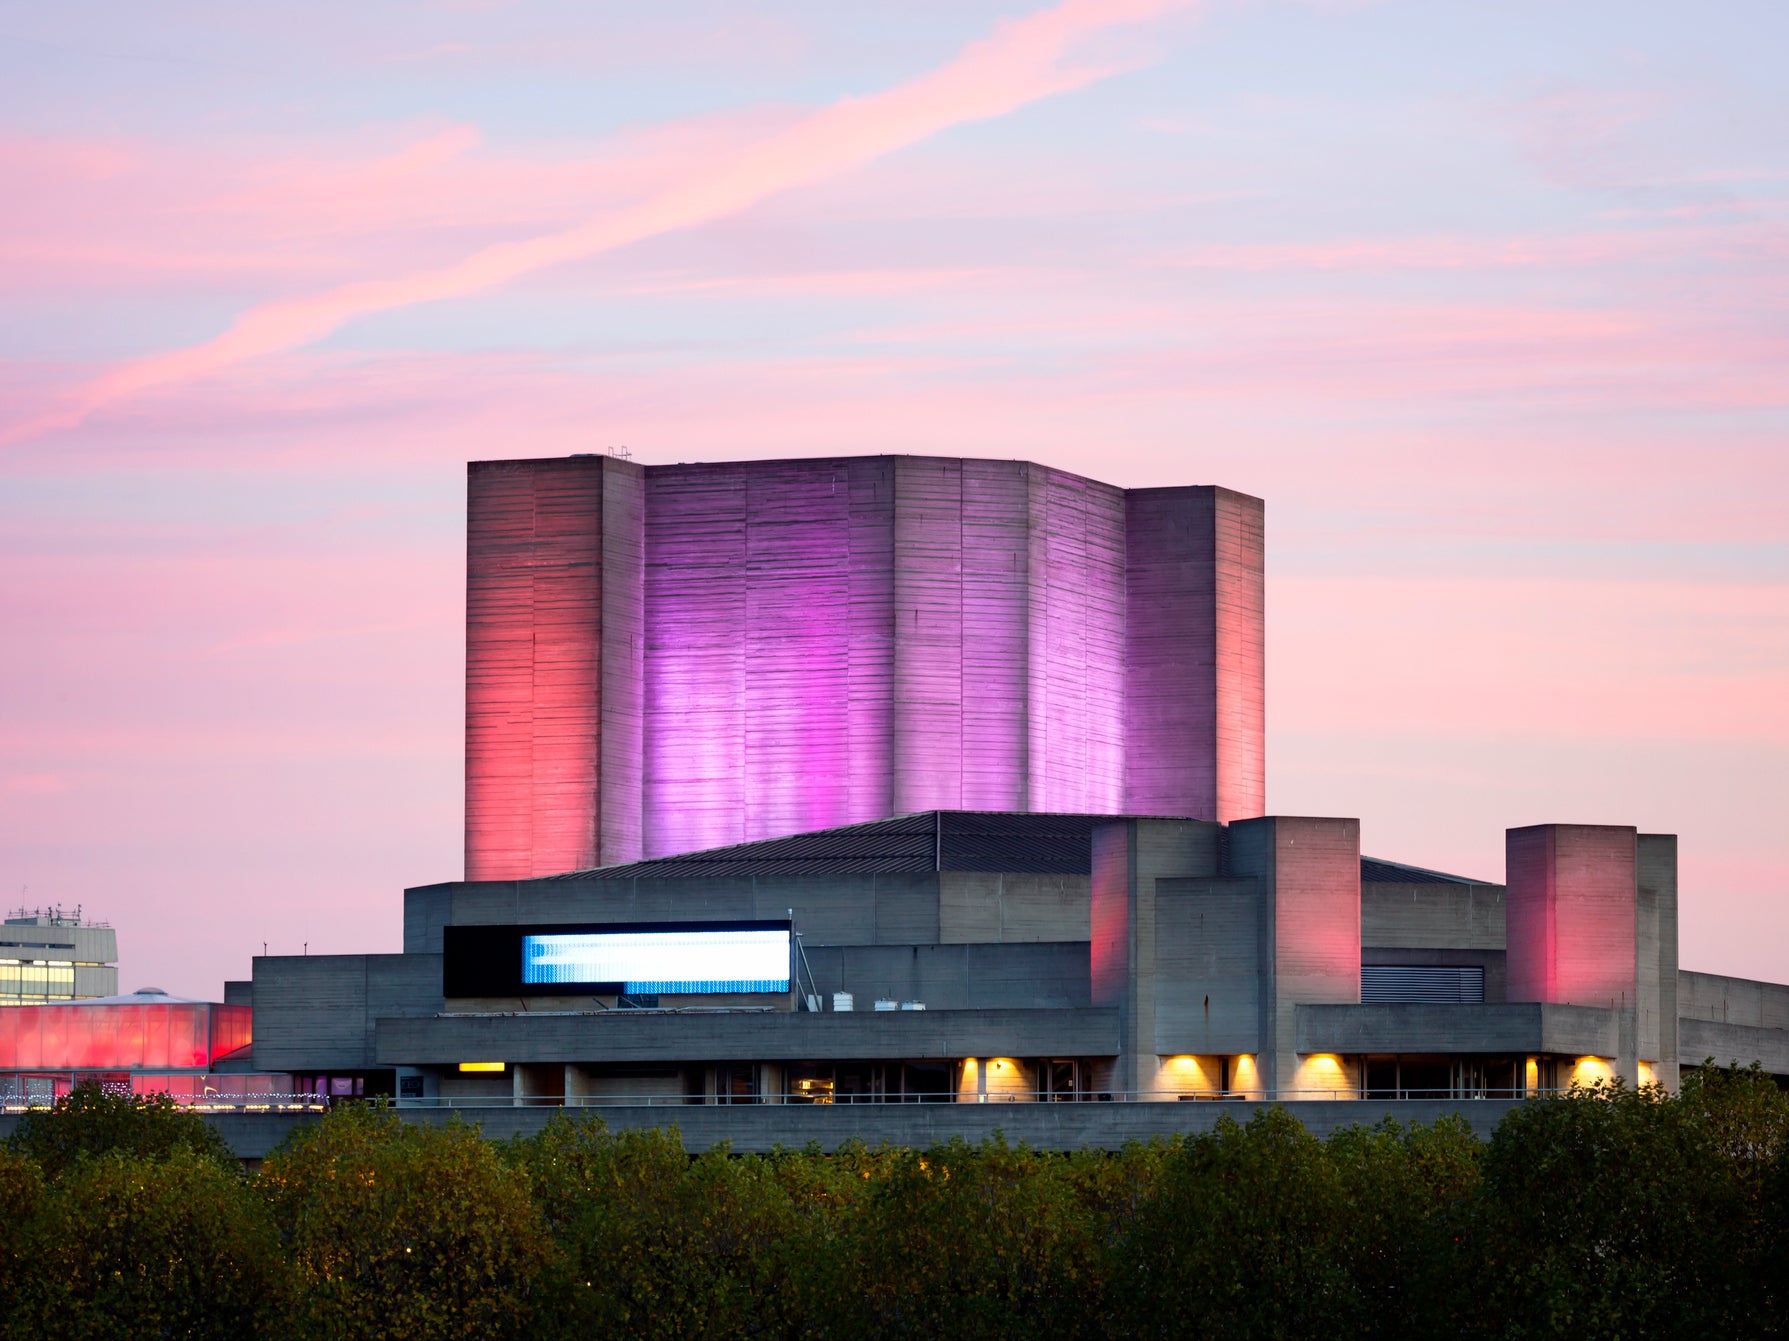 London’s National Theatre will pilot earlier start times to accommodate for more post-theatre socialising